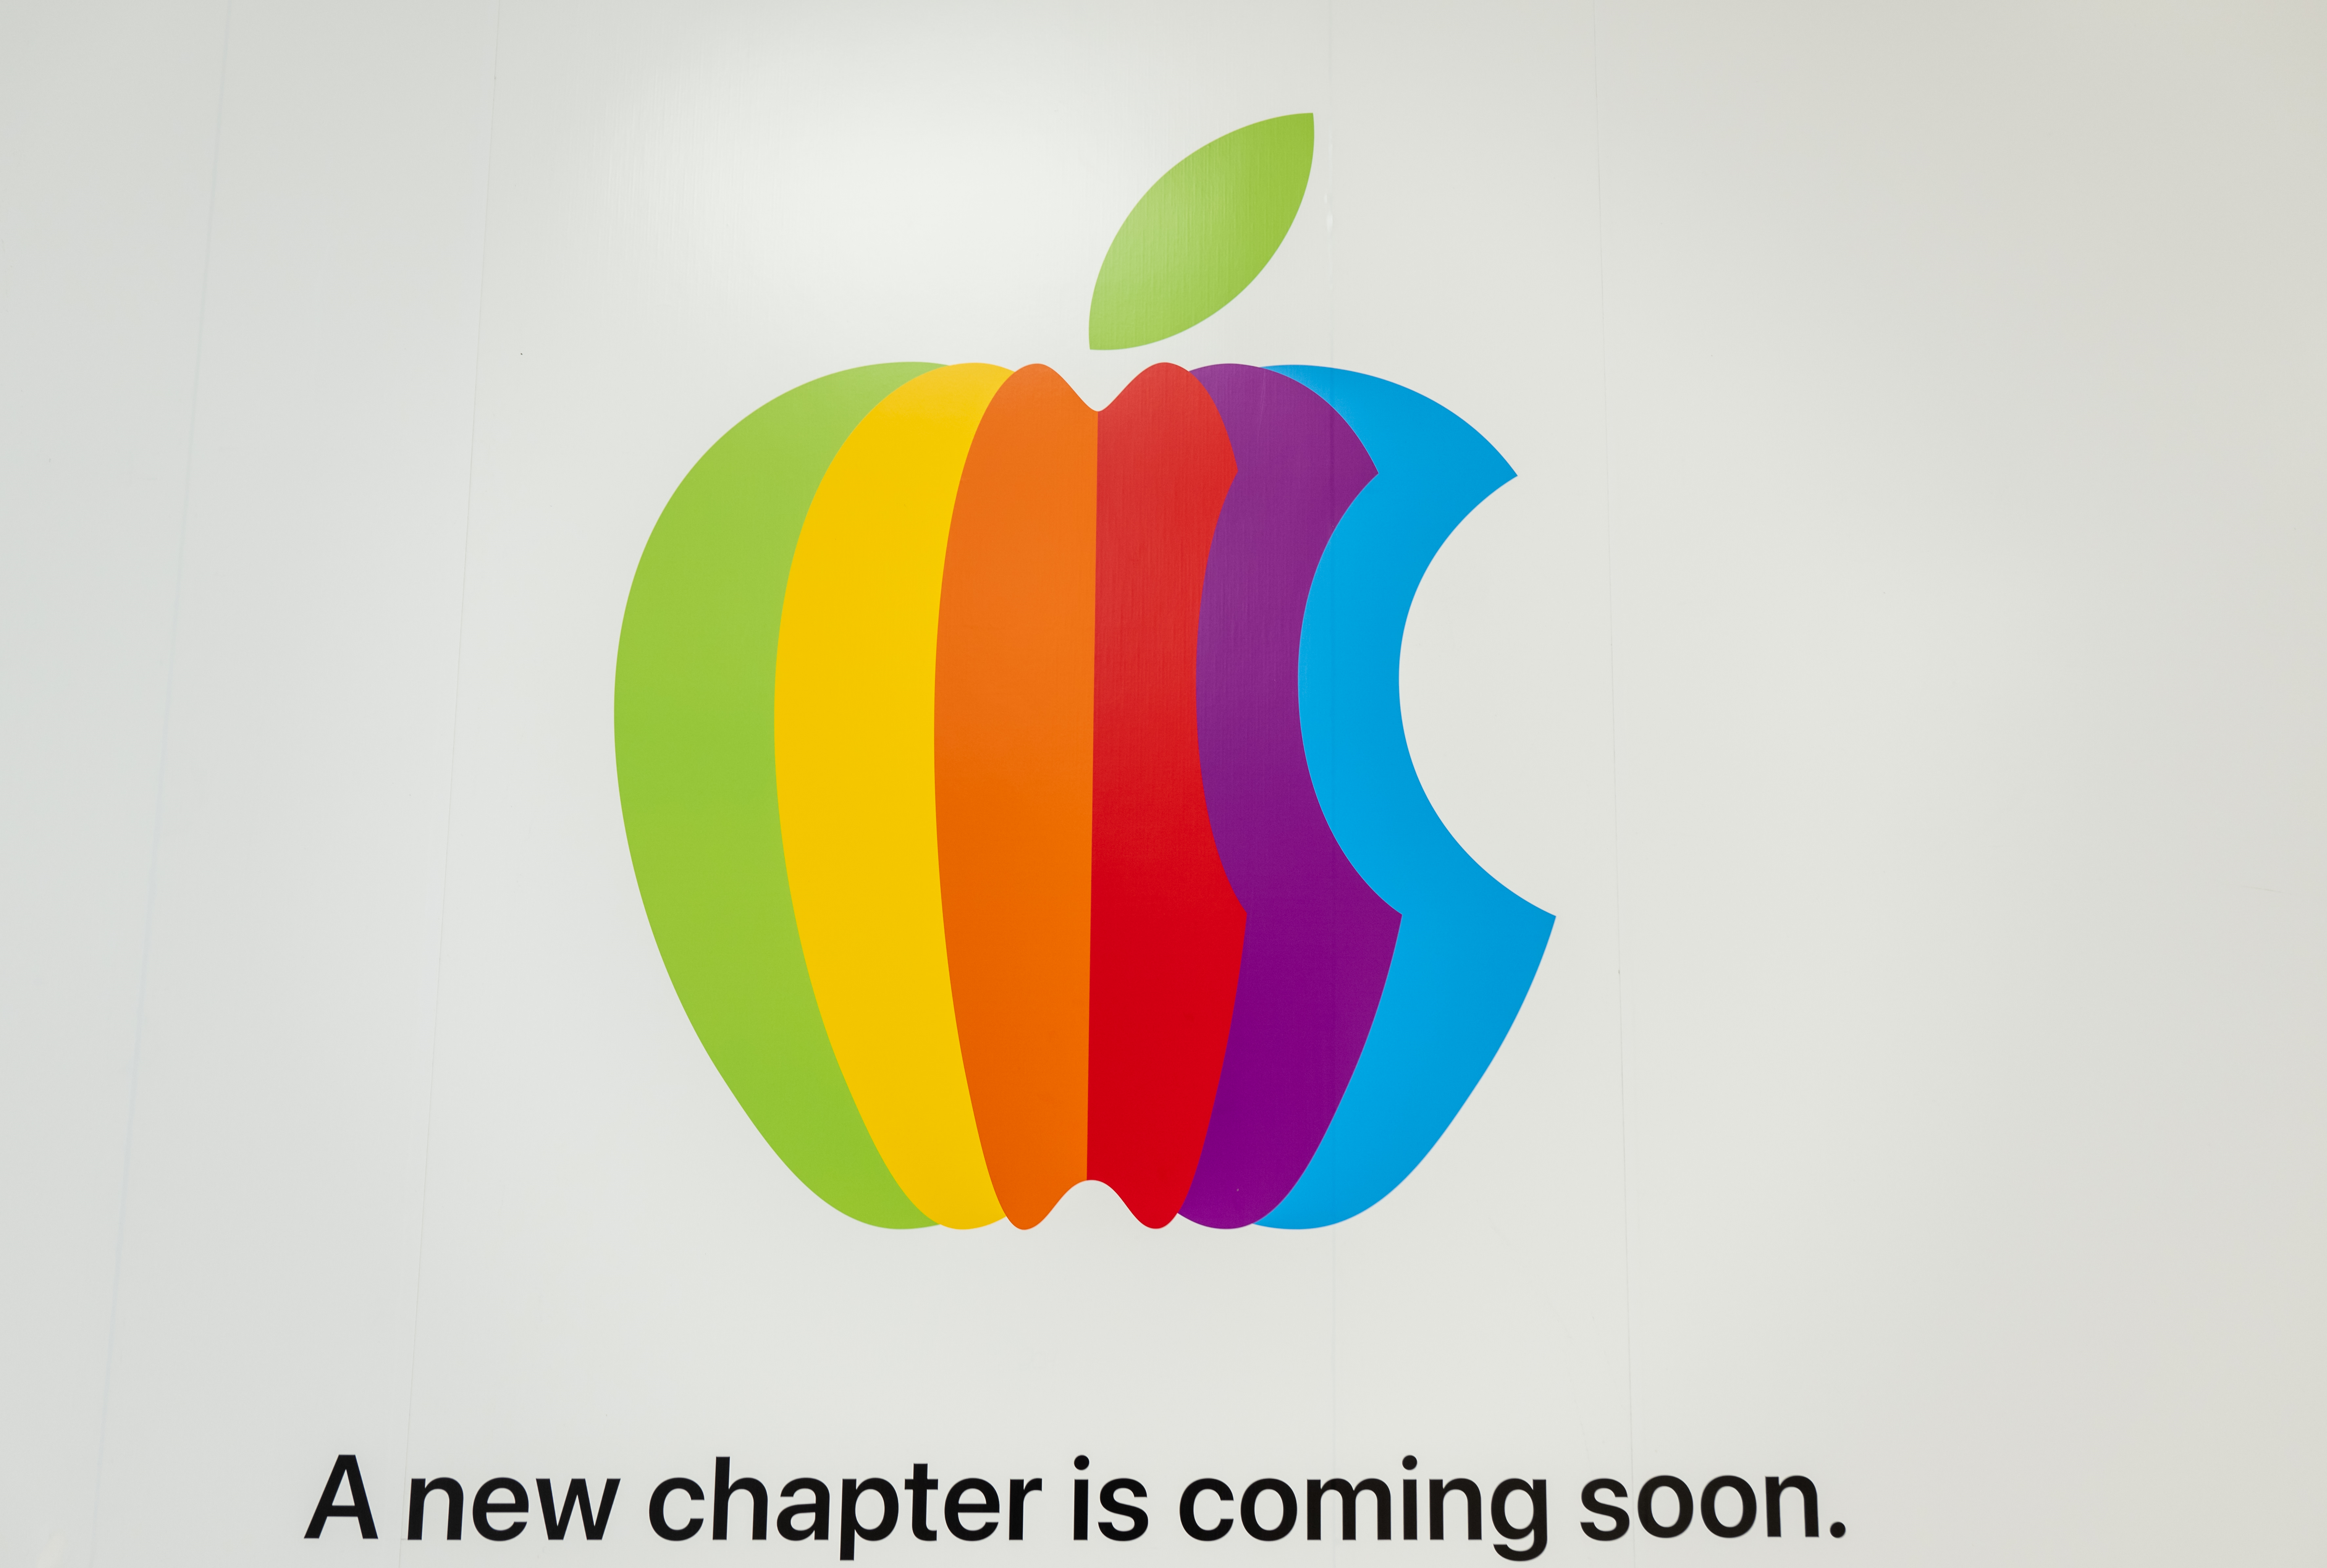 Colorful apple logo with text below that reads: A new chapter is coming soon